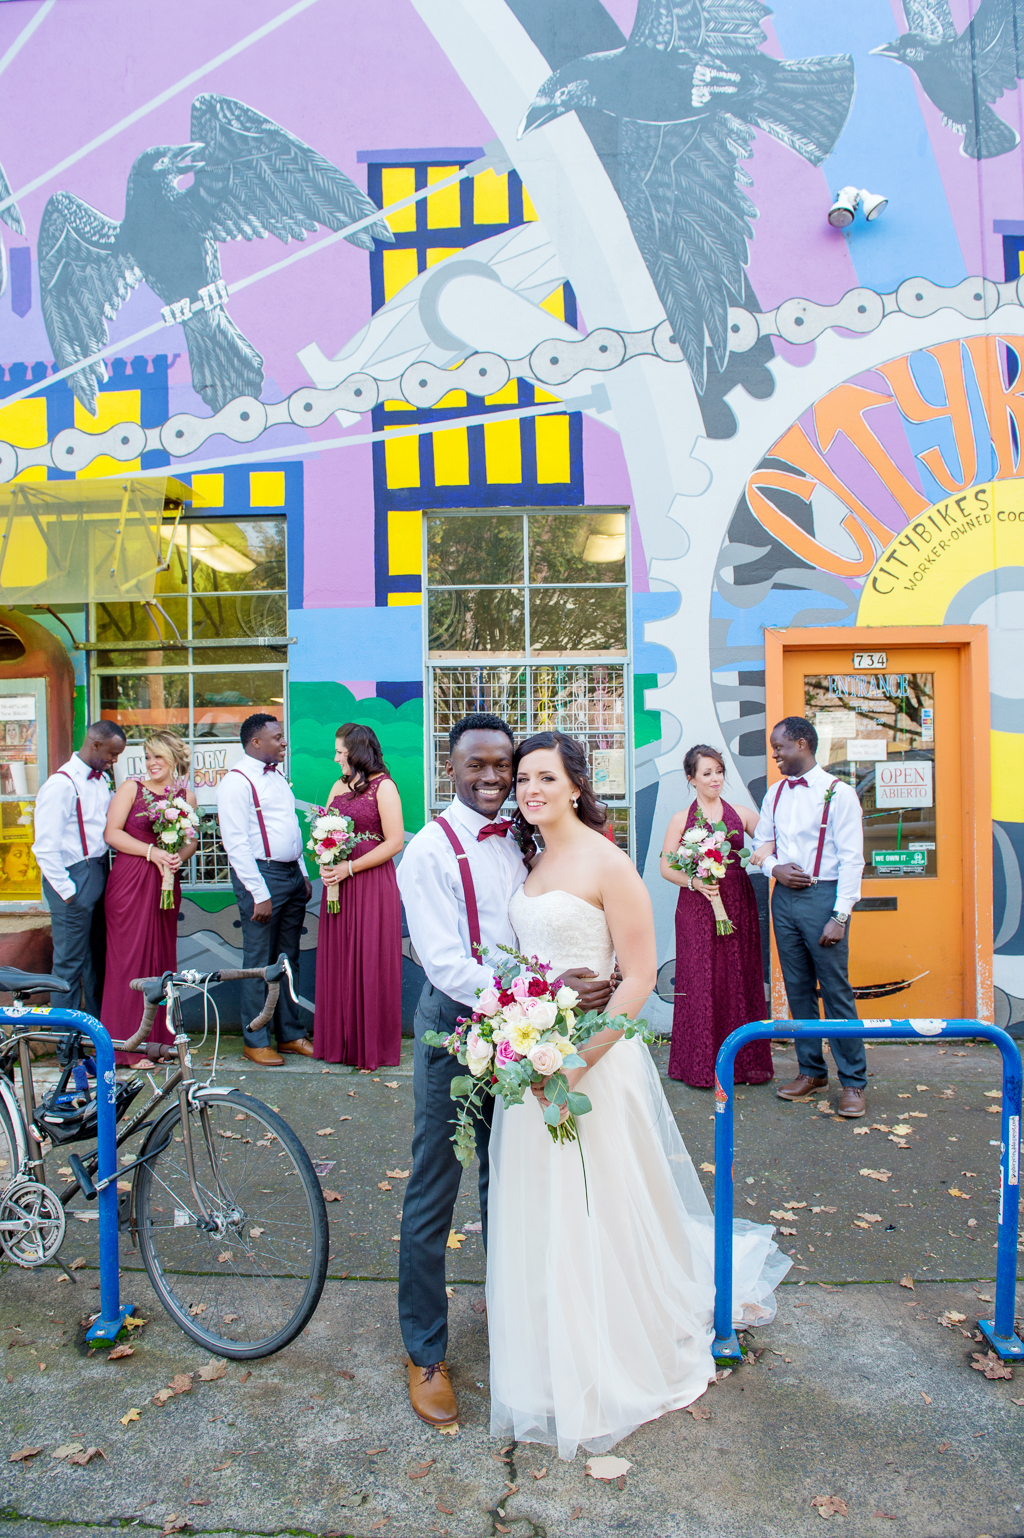 the wedding party wearing maroon stand under a brightly colored mural near burnside